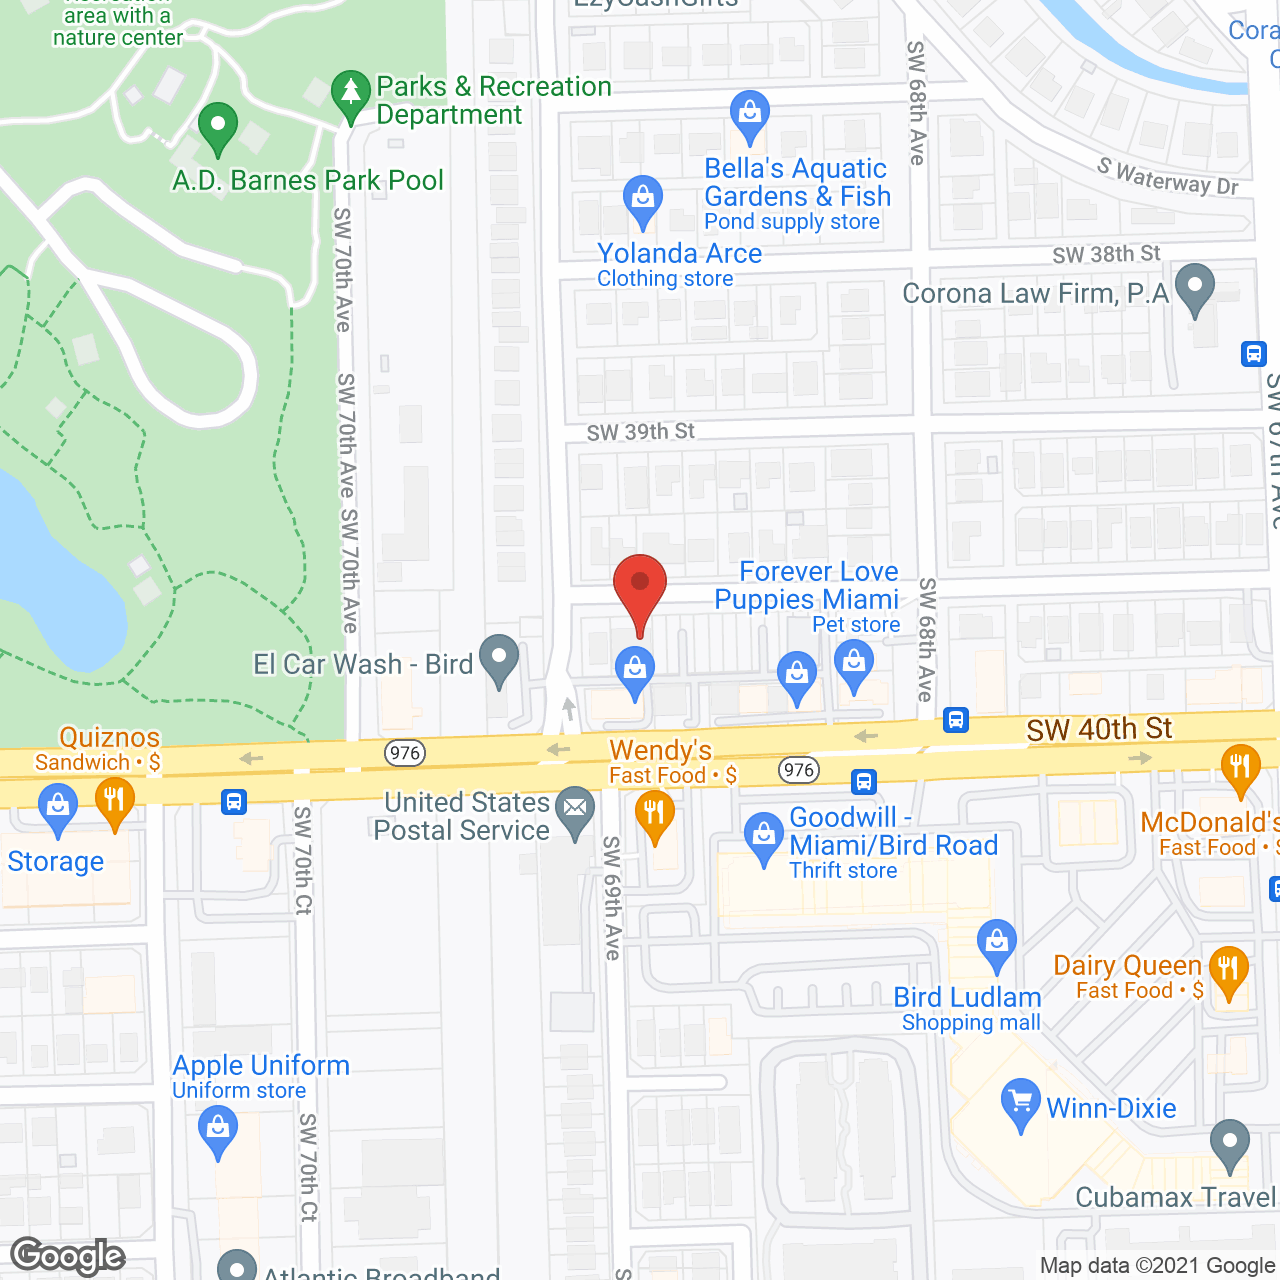 Victoria's Dedicated Retirement Home in google map